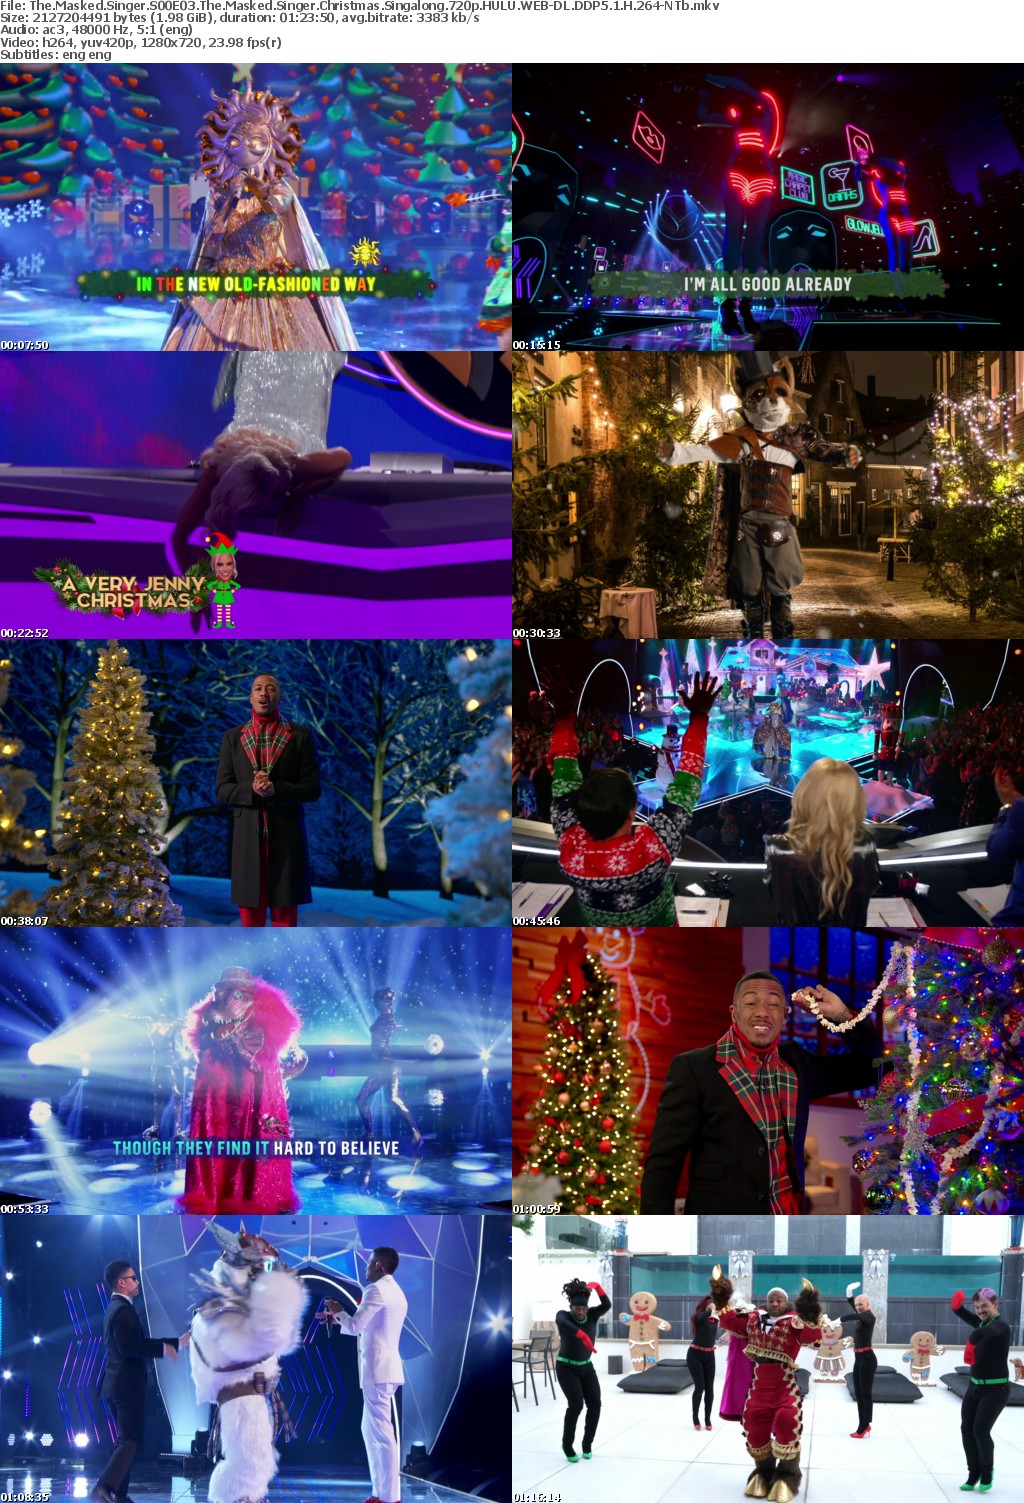 The Masked Singer S00E03 The Masked Singer Christmas Singalong 720p HULU WEBRip DDP5 1 x264-NTb